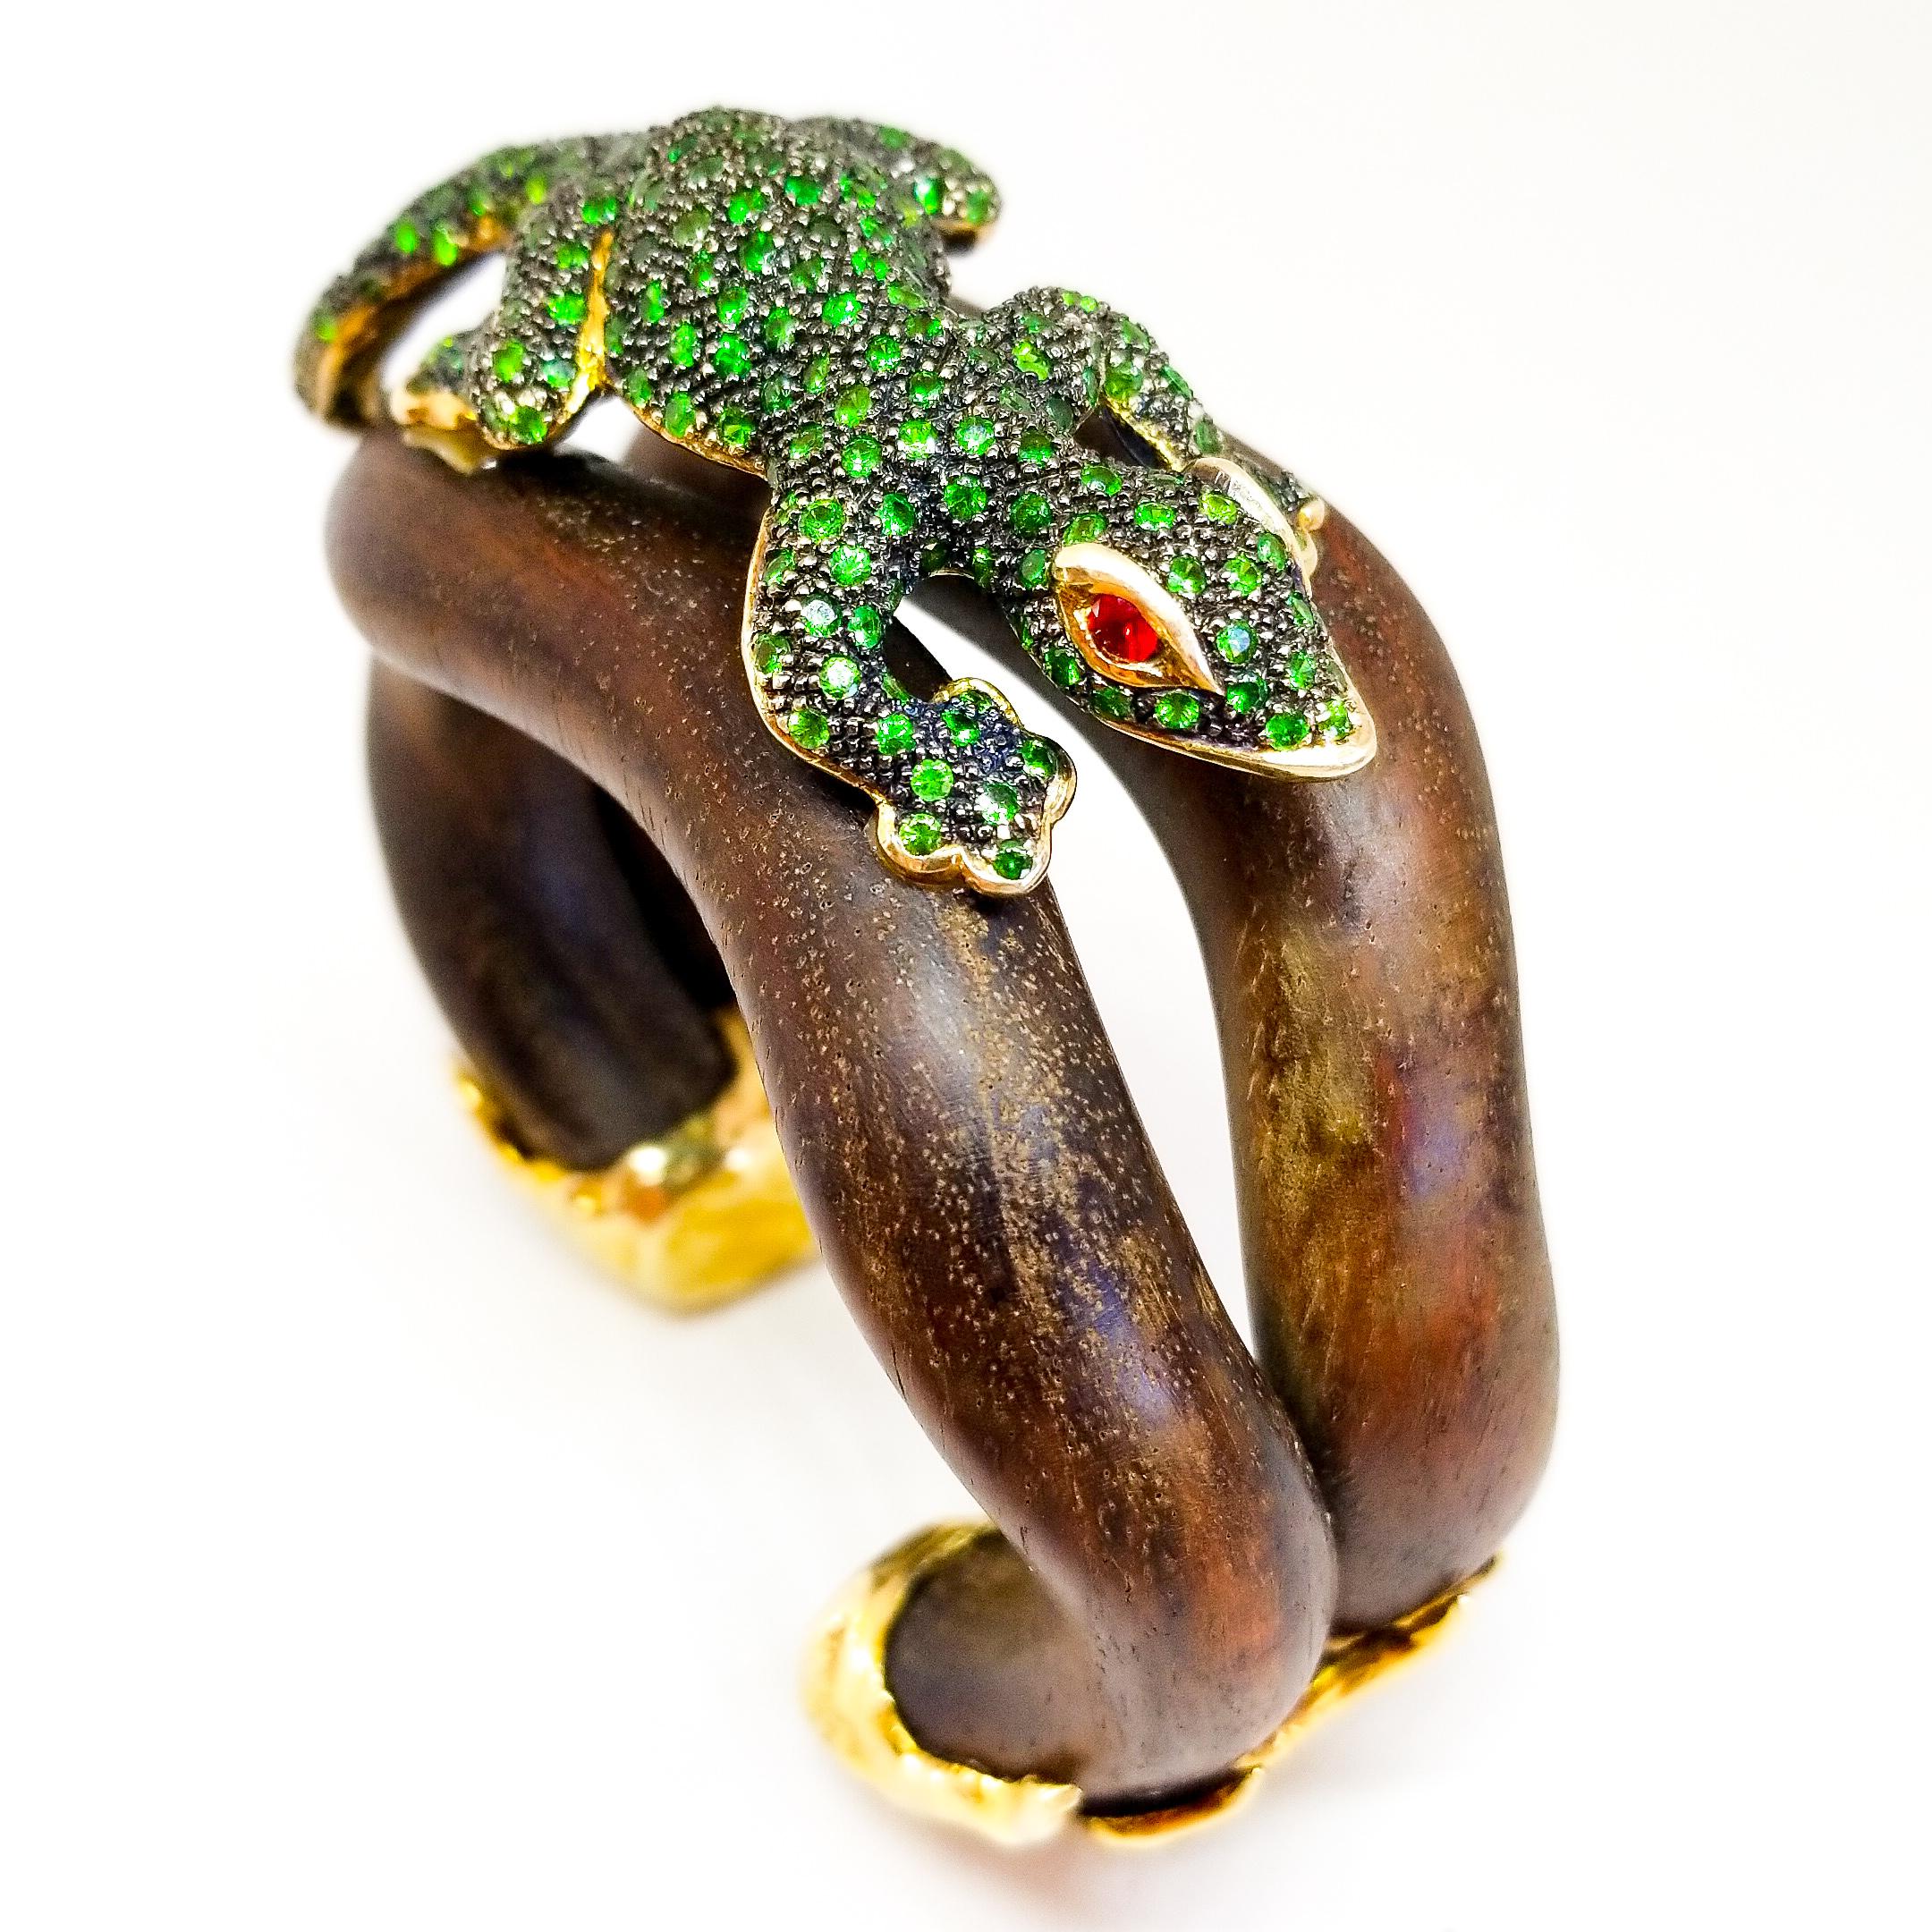 Unique.
One of a Kind Collection Piece.
Jeweled Lizard Cuff Bracelet in Silver and Gold on Wood.
This one of a kind Cuff Bracelet and Curio Showpiece will be the talk and attention of any gathering. Crafted by hand utilizing a Delicate curve of